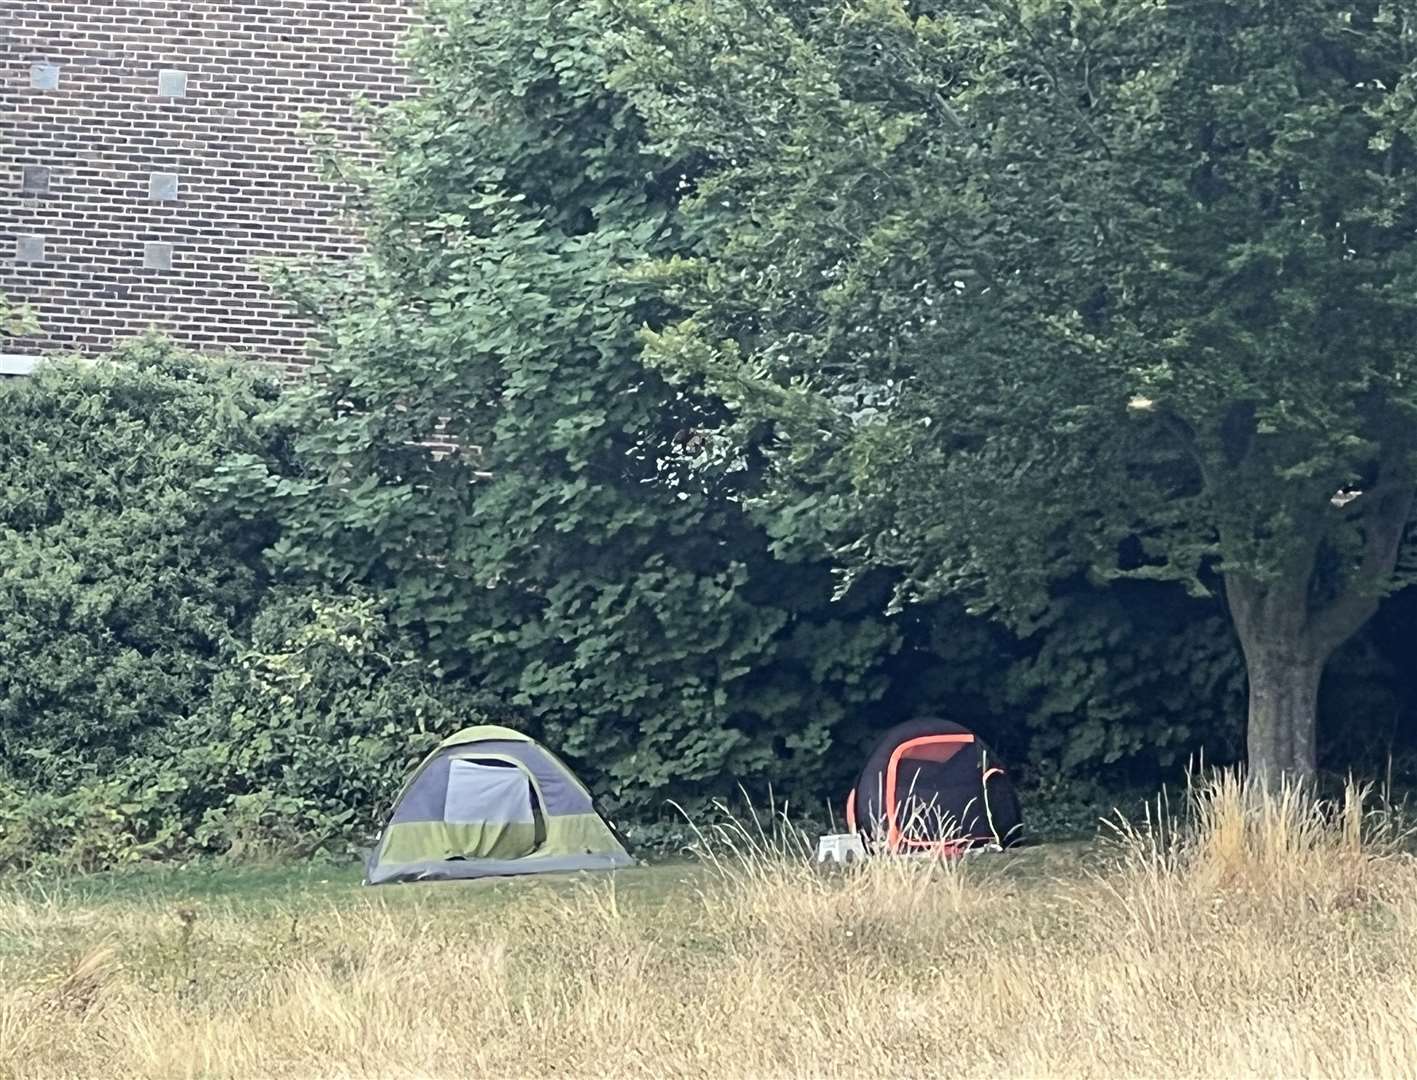 Resident's opposite a Rochester field want the tents removed. Picture: Megan Carr